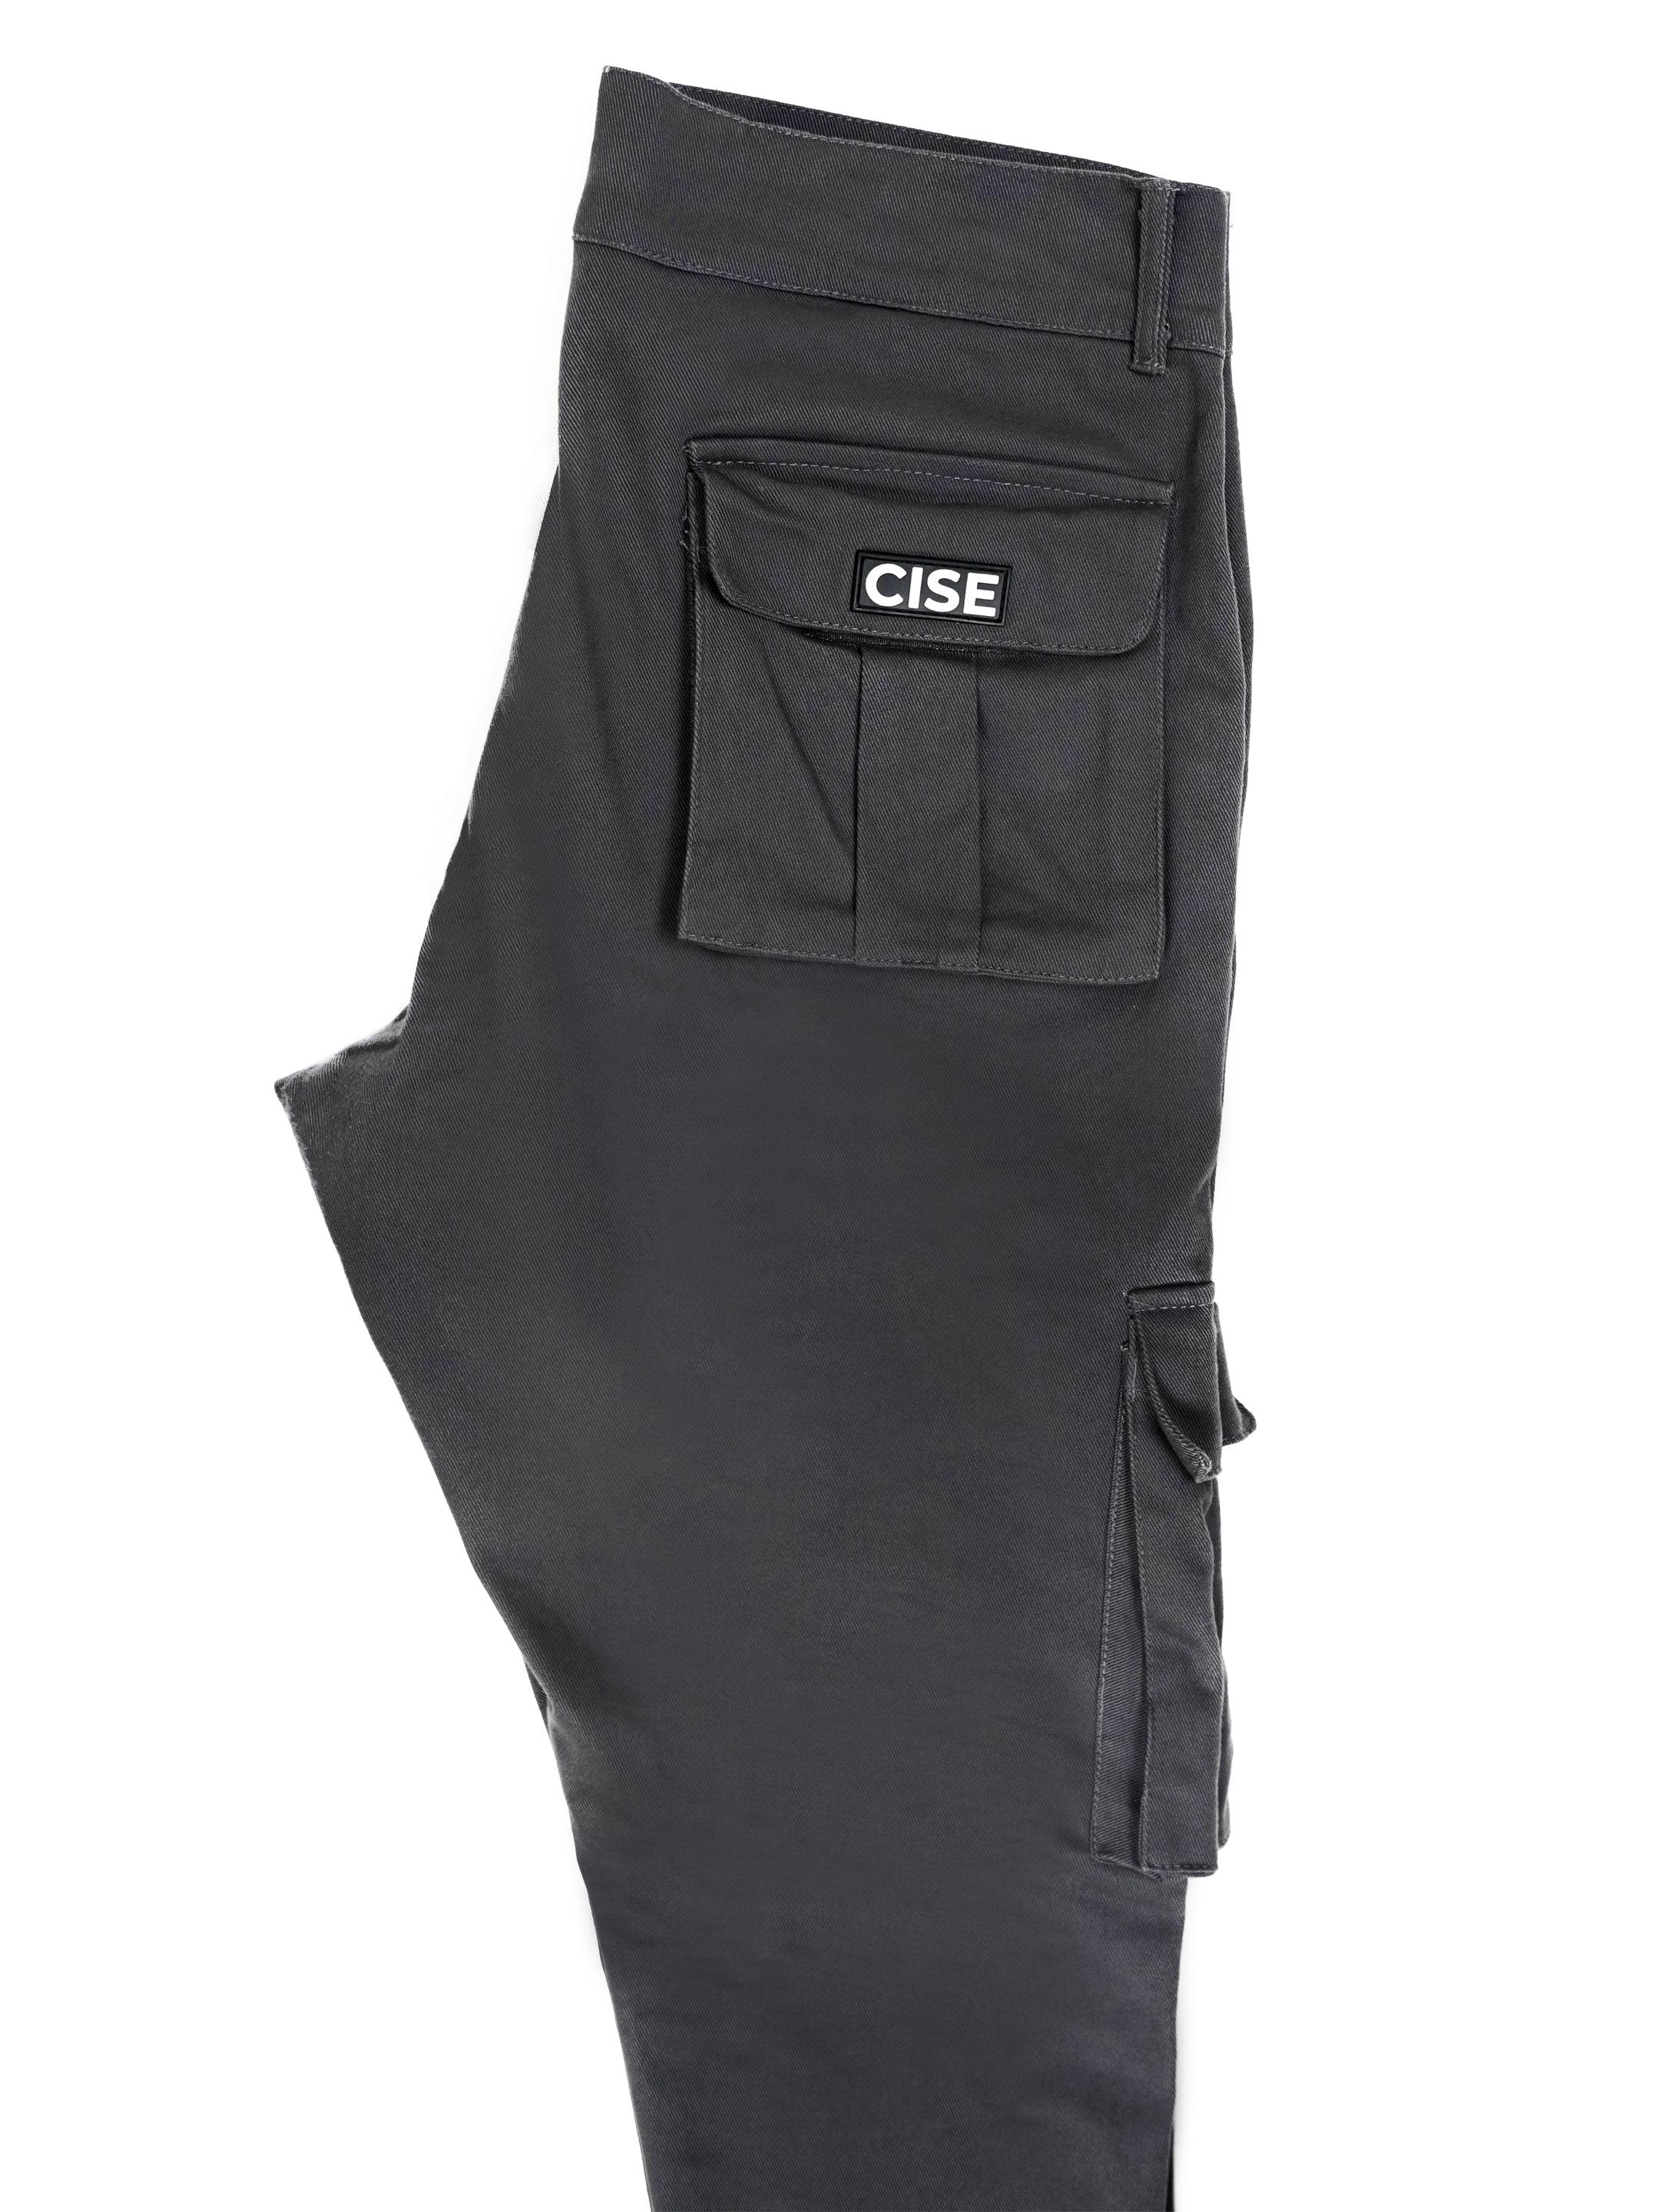 CISE - Strategy Cargo Grey Pant